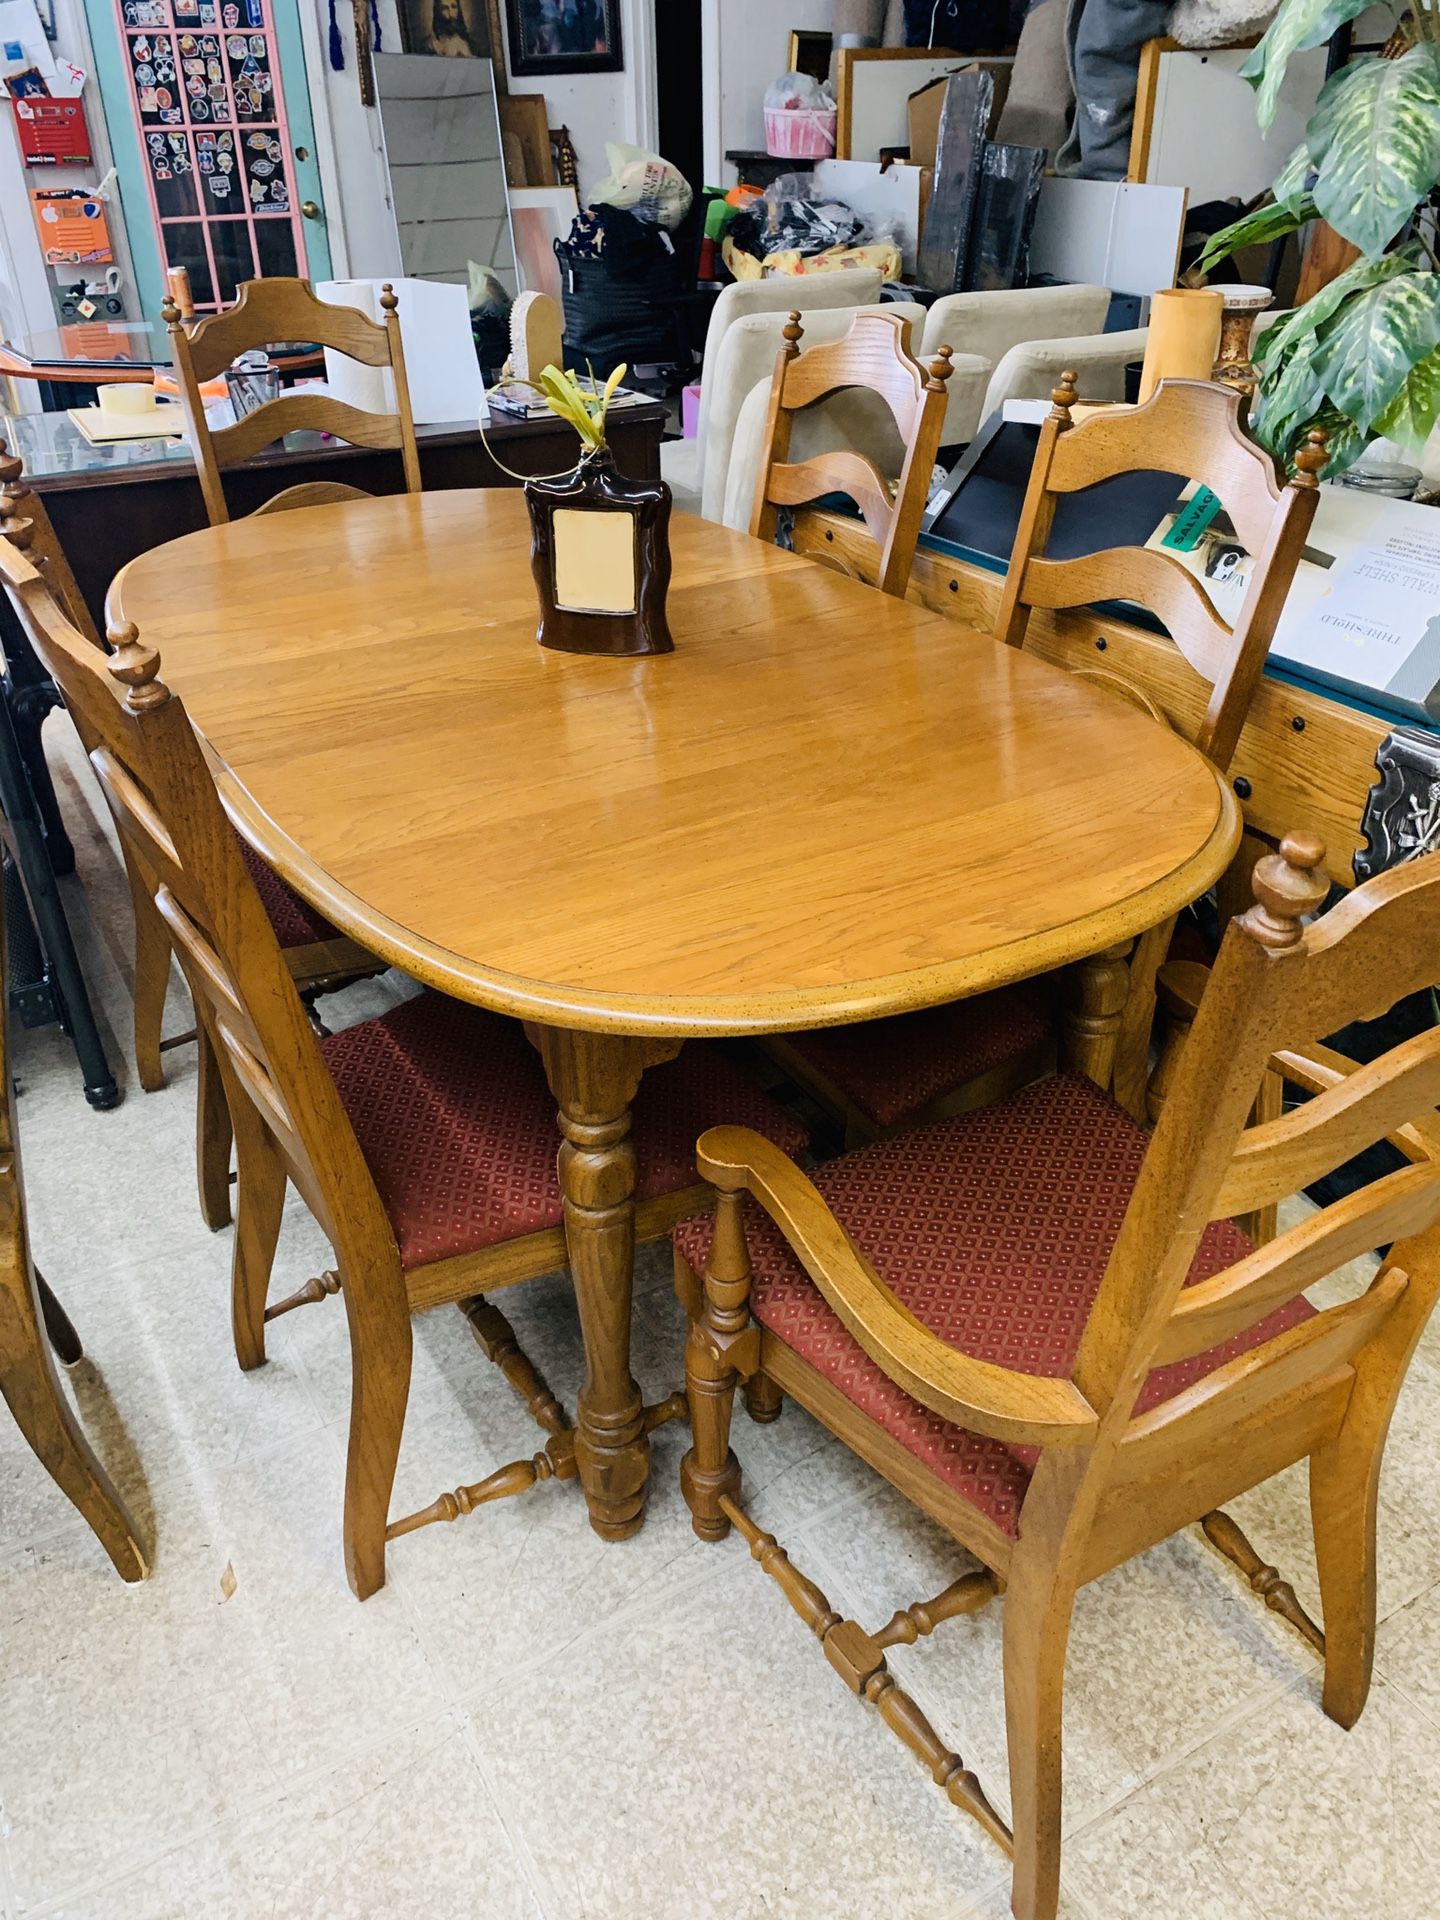 🔥🔥🔥🔌🔌🔌🔌SALE DINING TABLE SET $120